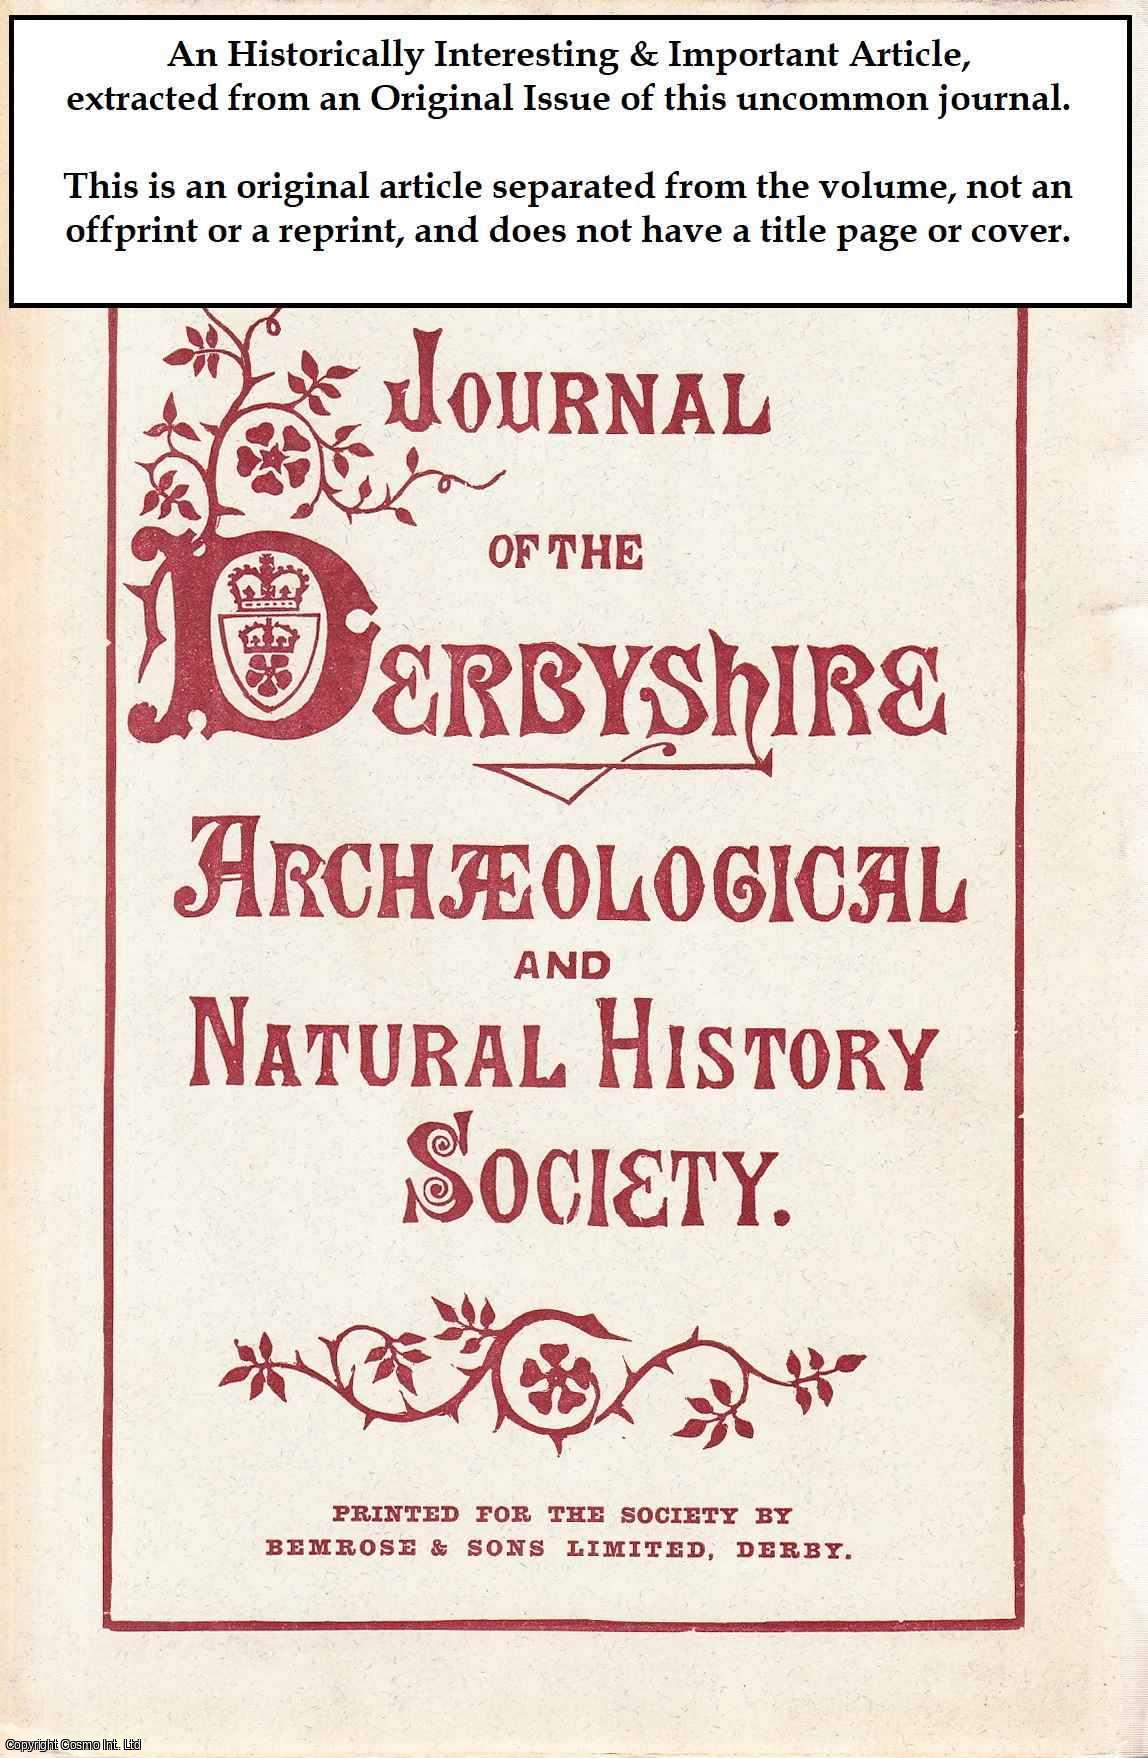 No Author Stated - Grant by Sir John Benet, to Pembroke Coll, Oxford, of Certain Rents in Derbyshire. An original article from the Journal of the Derbyshire Archaeological & Natural History Society, 1907.